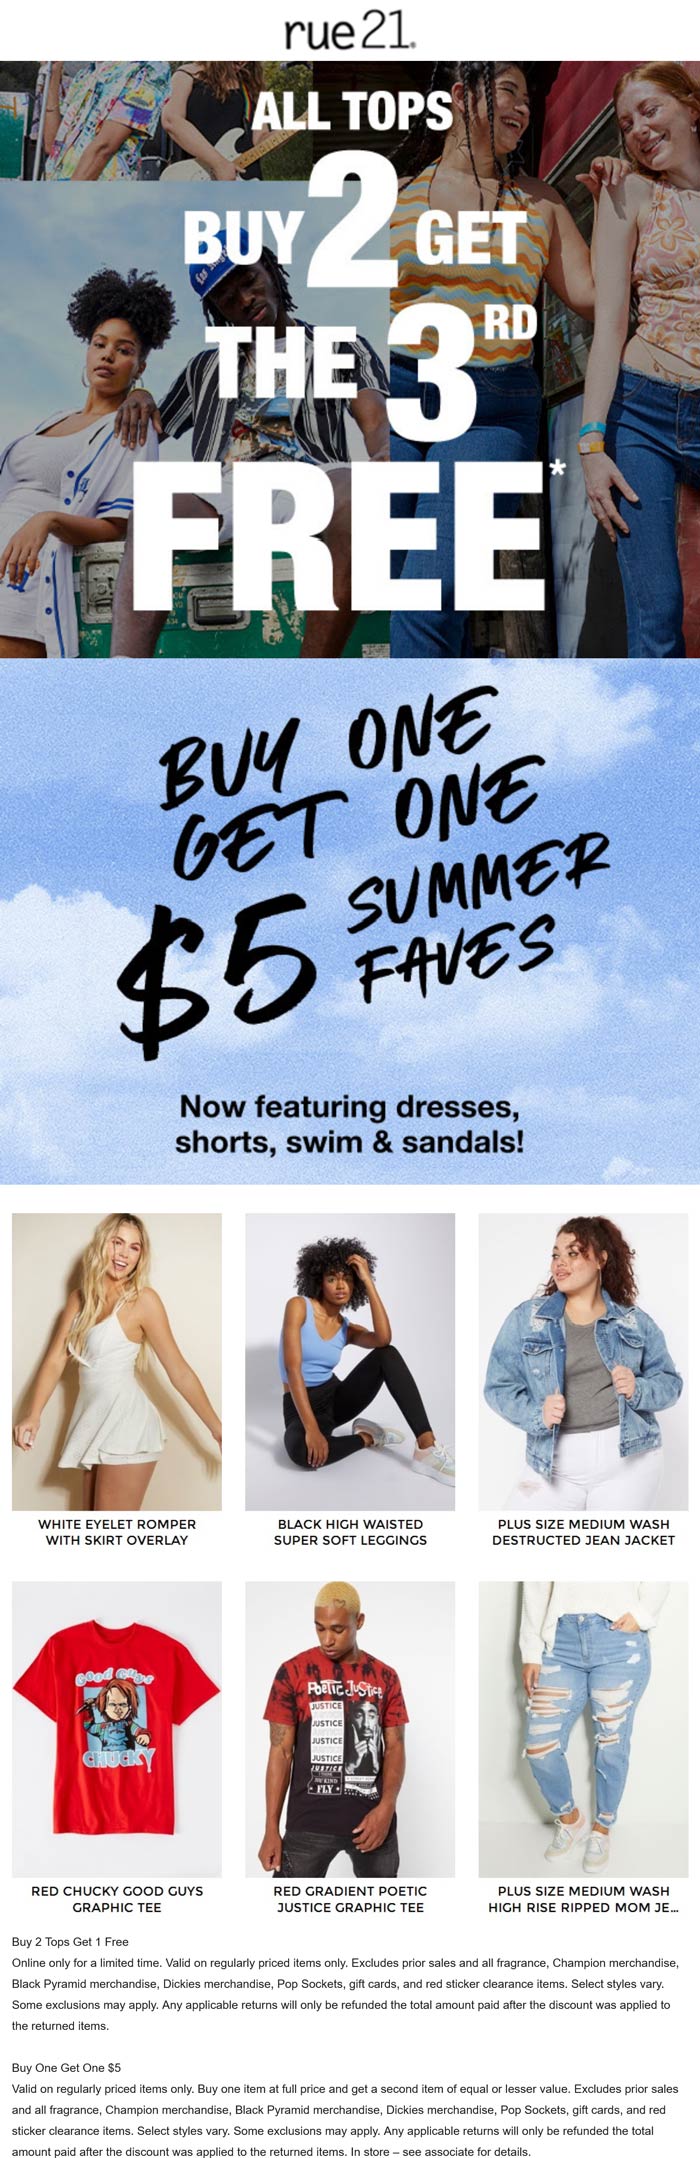 rue21 stores Coupon  3rd top free & more online at rue21 #rue21 